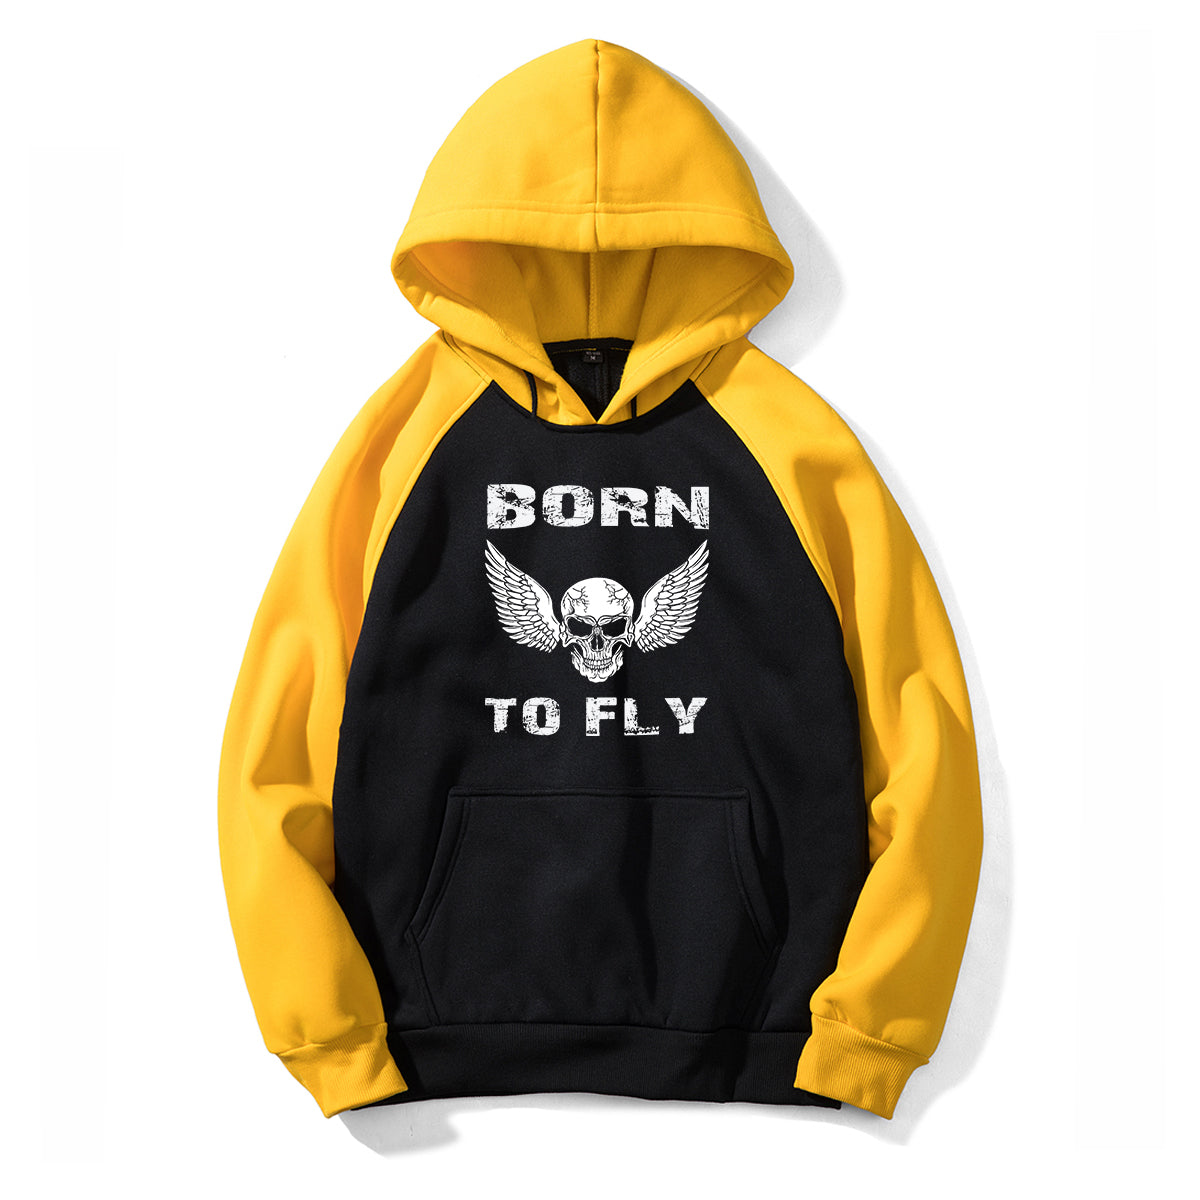 Born To Fly SKELETON Designed Colourful Hoodies